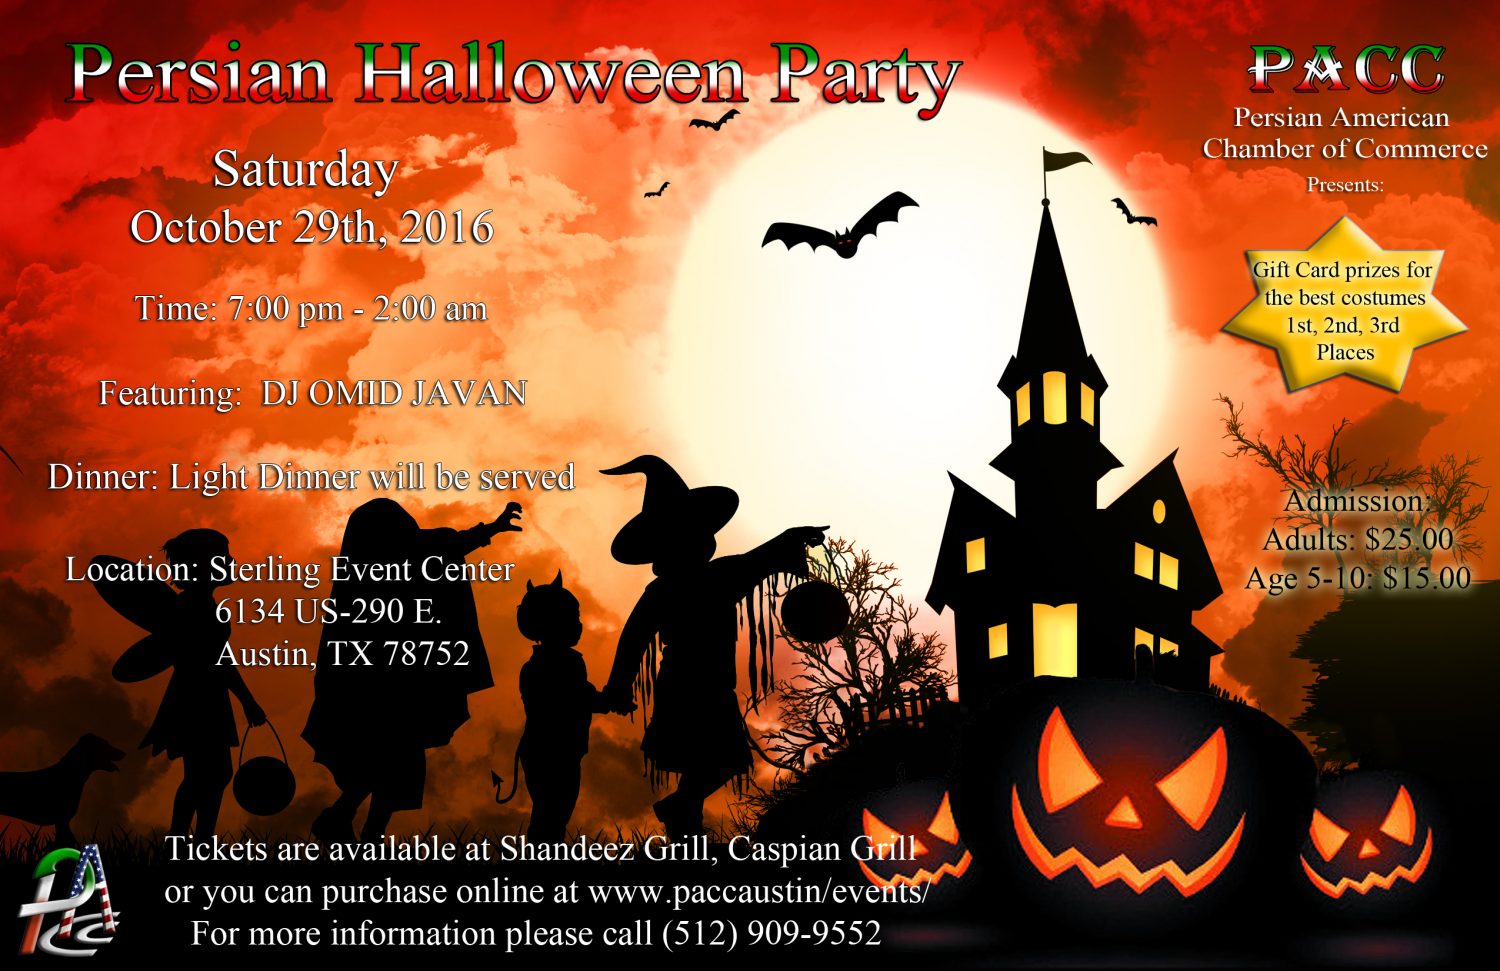 PACC Events Persian Halloween Party